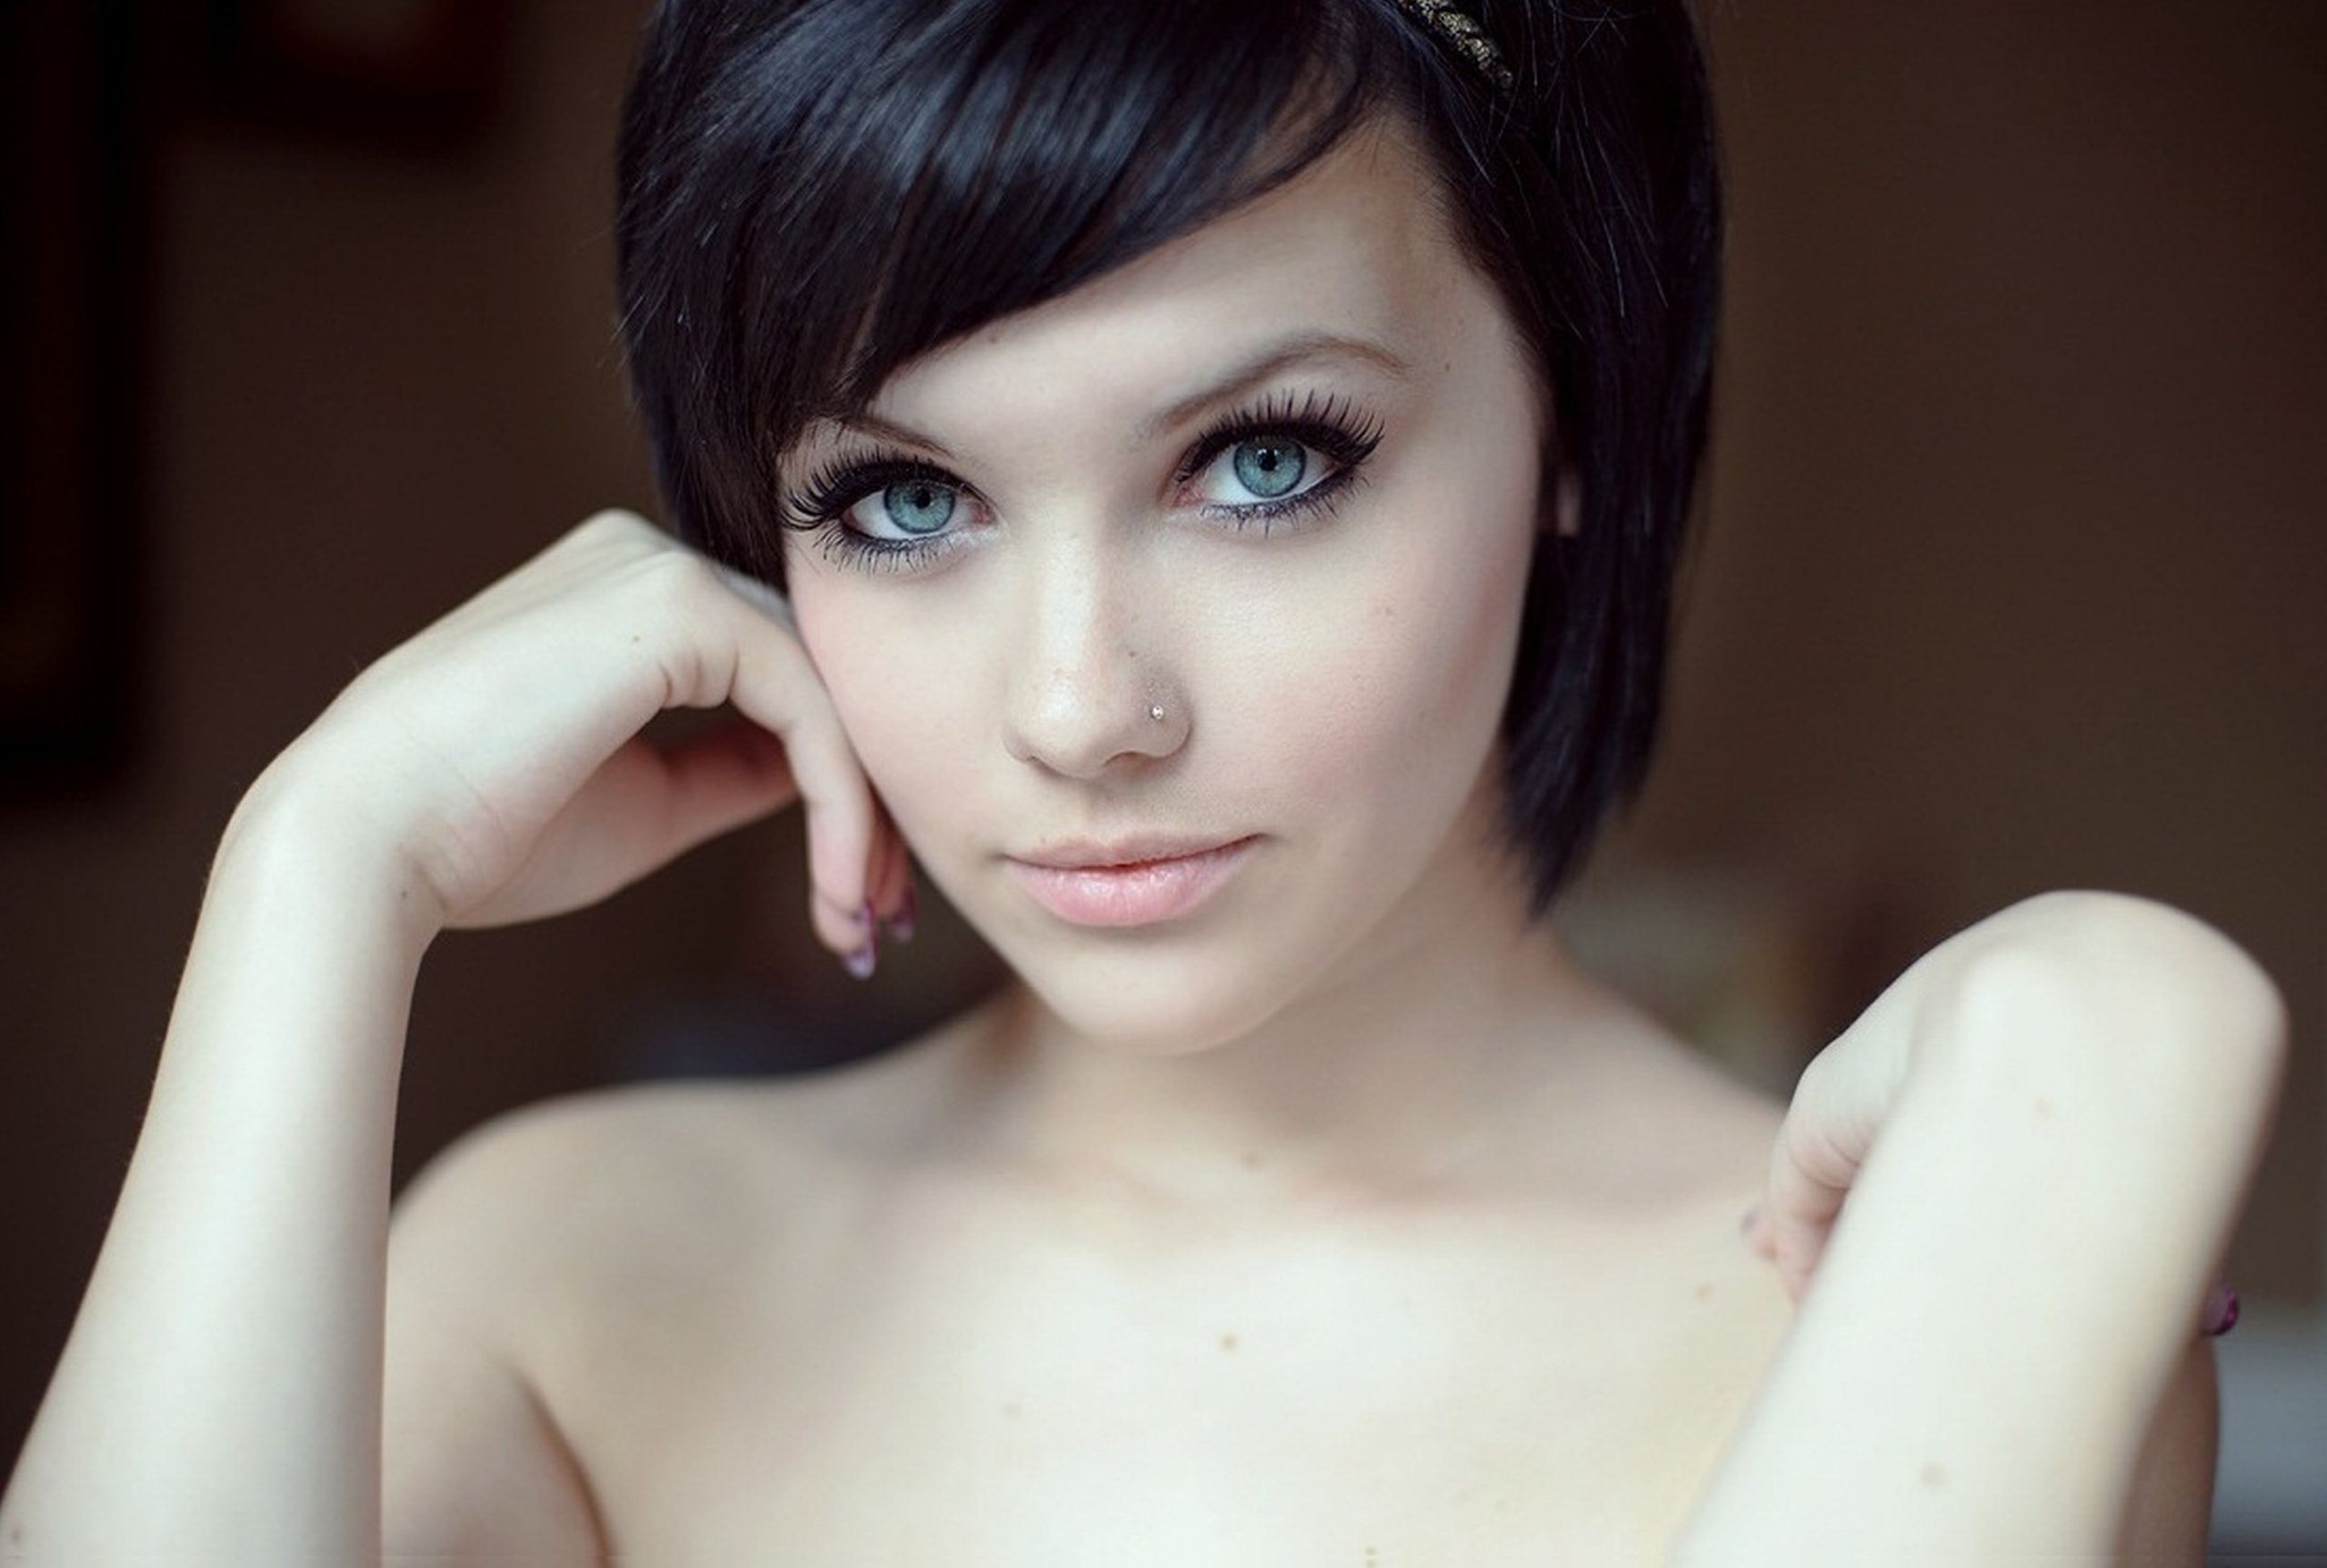 1. Beautiful girl with blue eyes and dark hair - wide 4